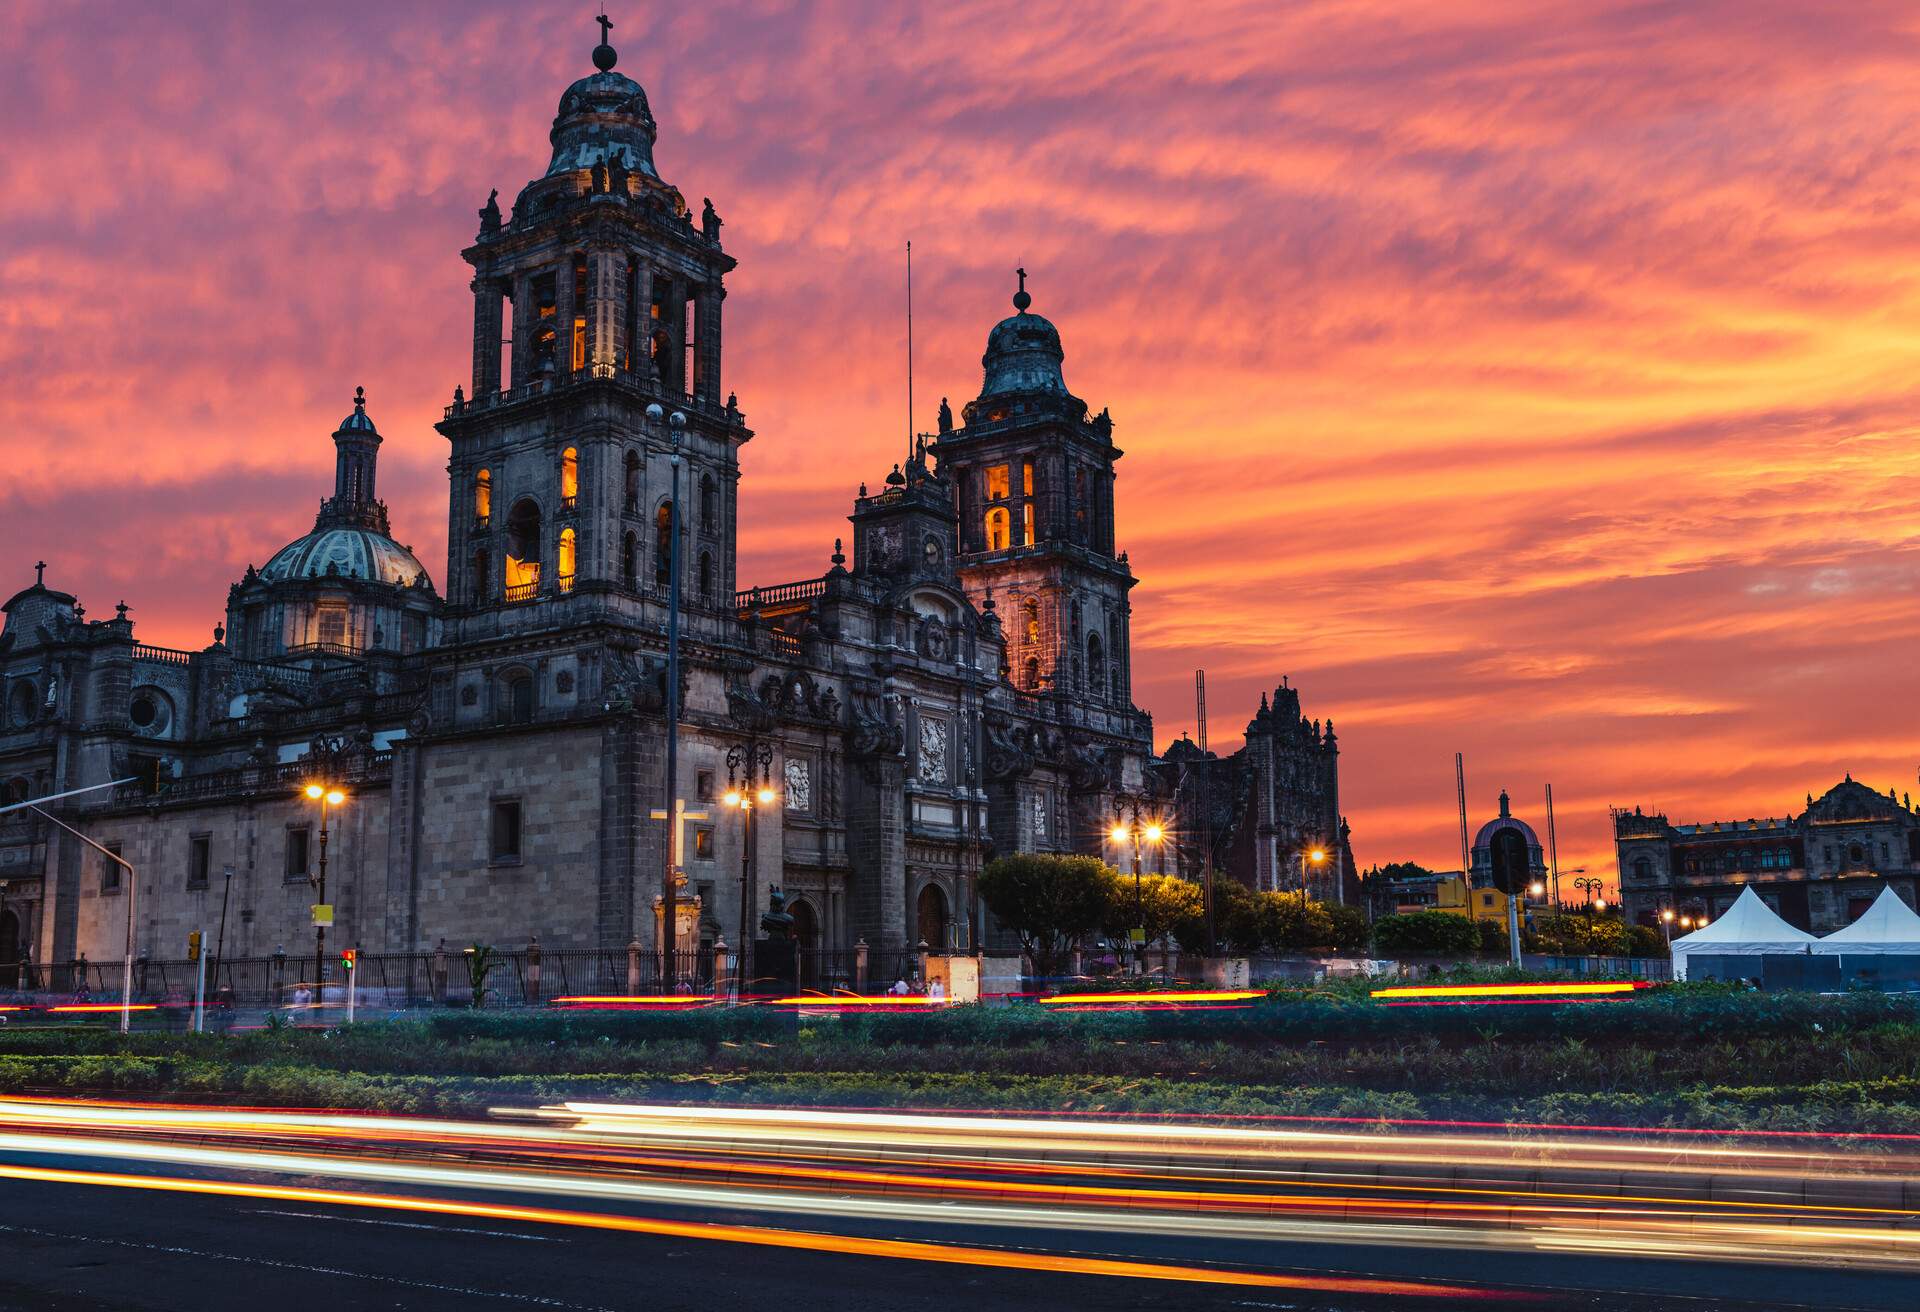 DEST_MEXICO_MEXICO_CITY_CATHEDRAL_shutterstock_625814777.jpg